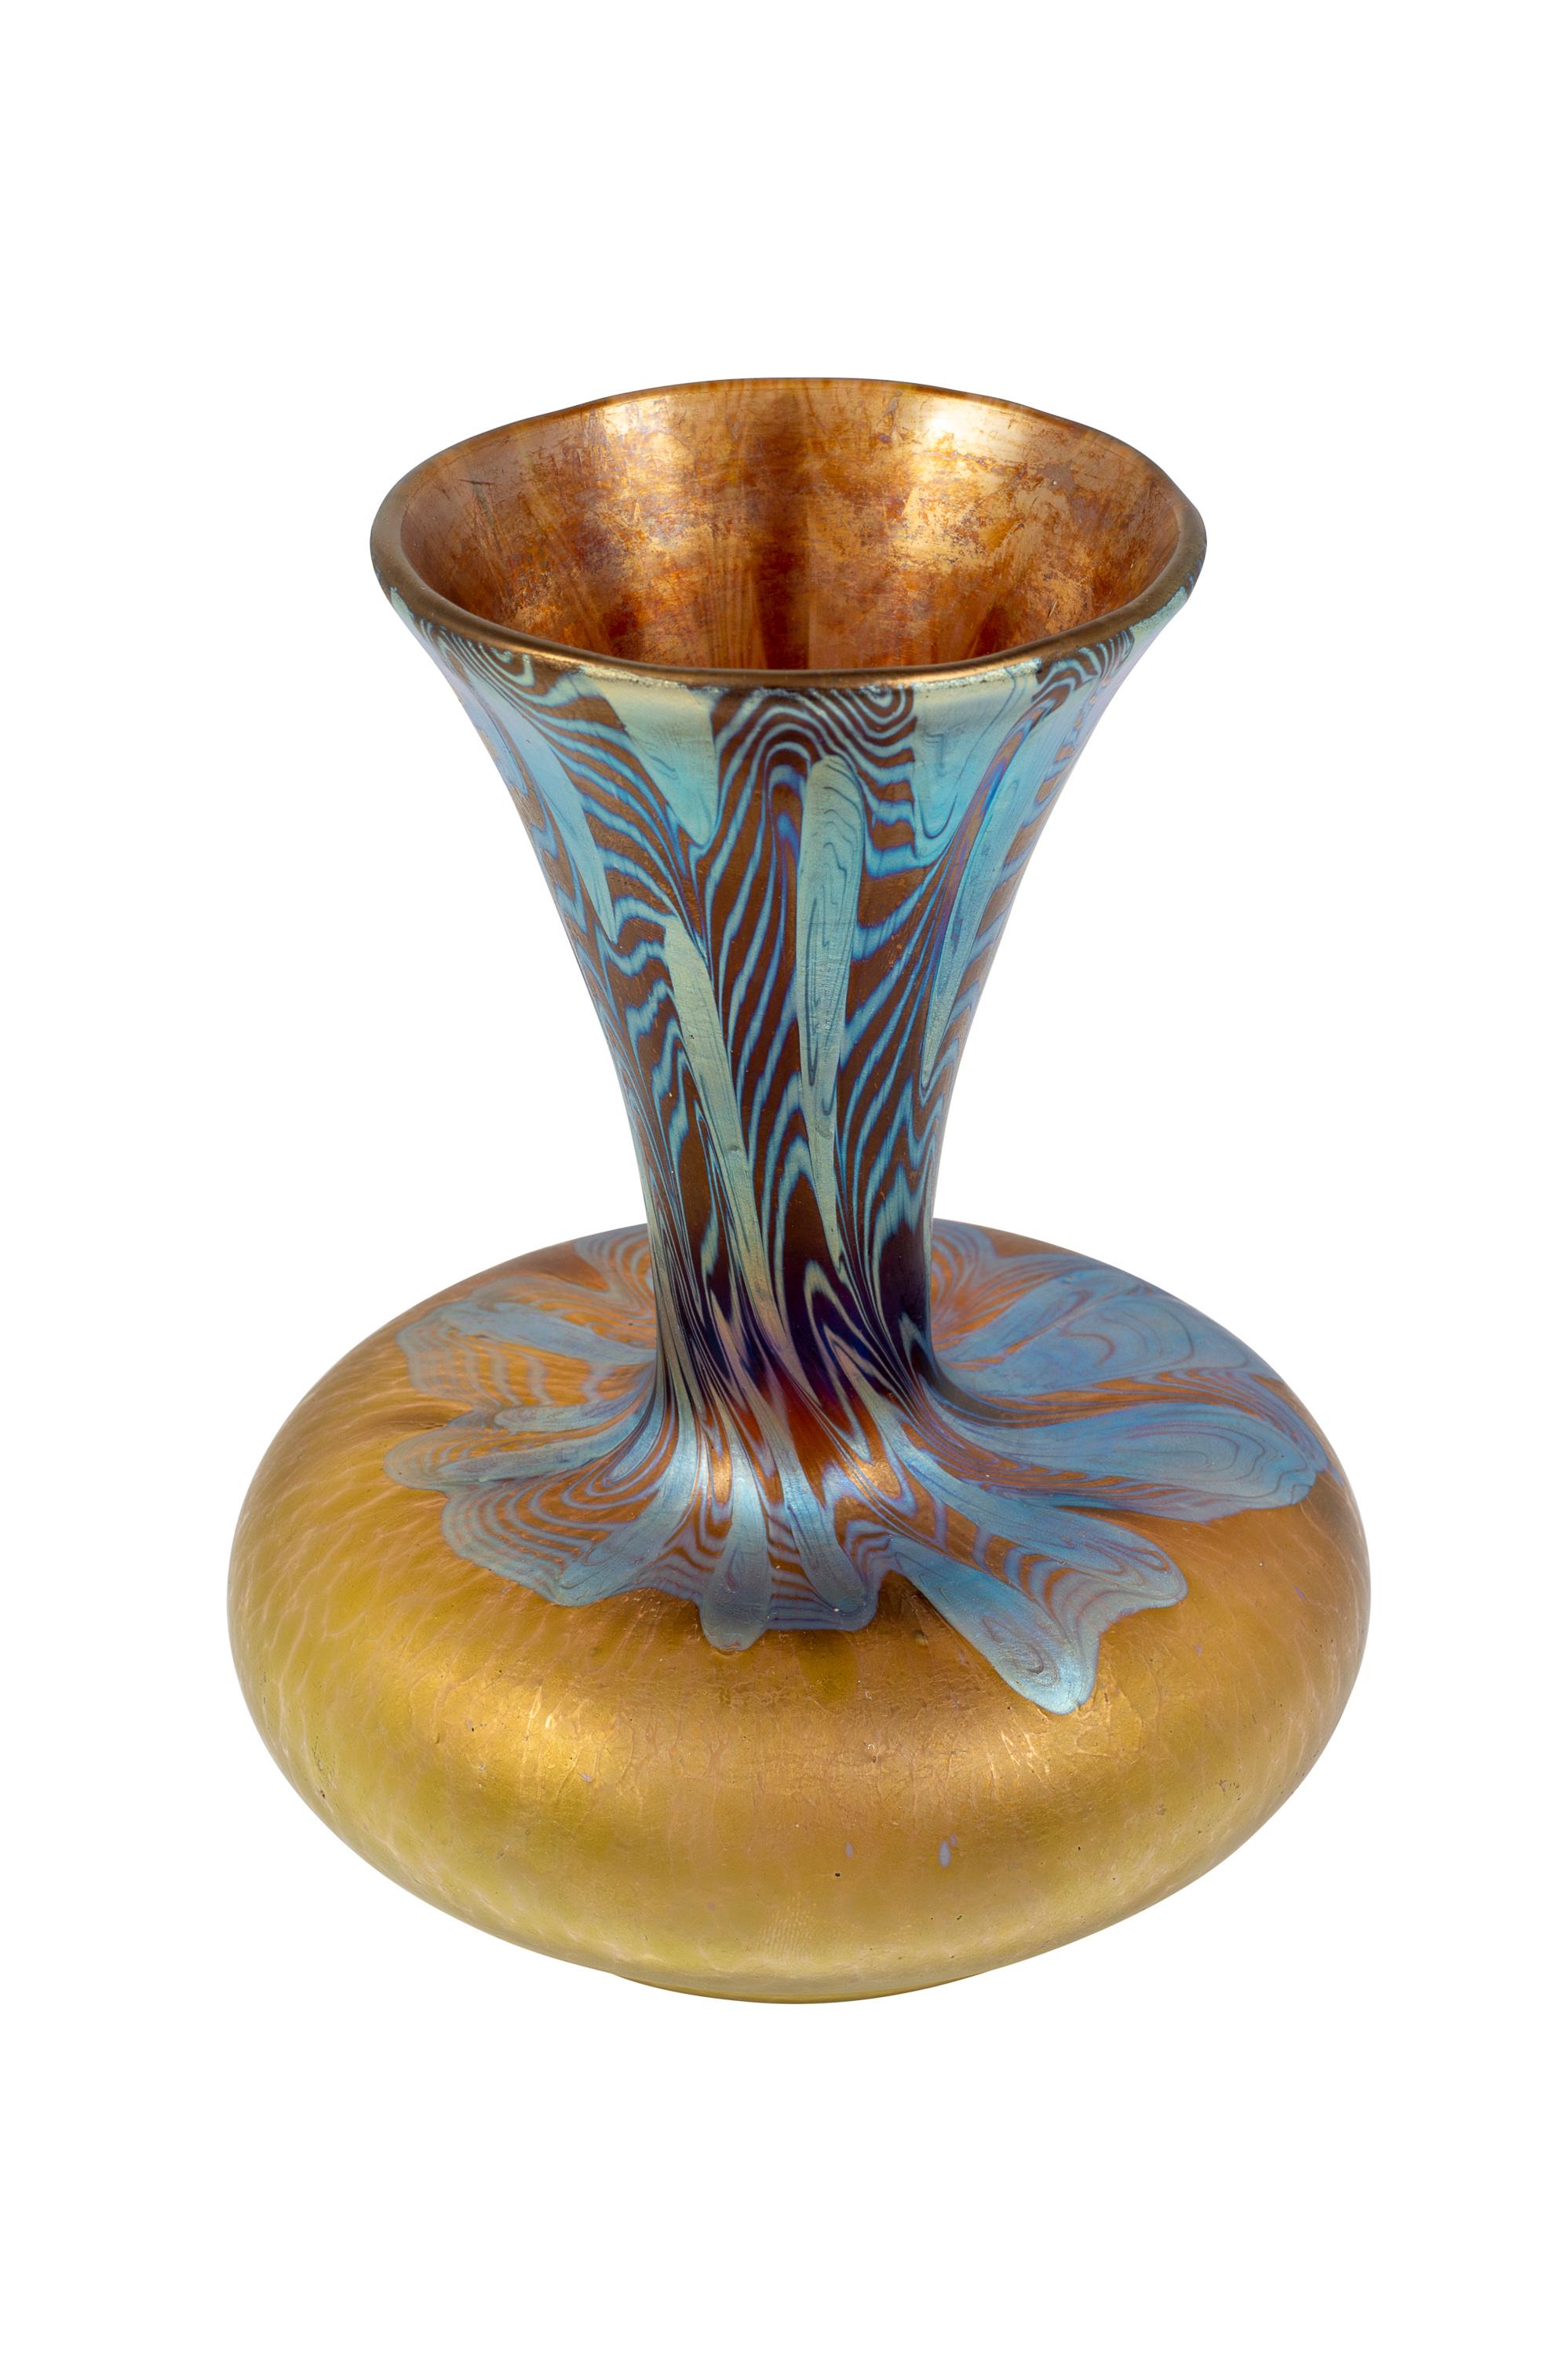 Austrian Jugendstil Glass Vase Johann Loetz Witwe with Argus decoration PG 2/351 ca. 1902

The “Argus” decoration is one of the most popular variants in the family of Phenomen Genres and was created in 1902. With its inserted eyes of silver oxide